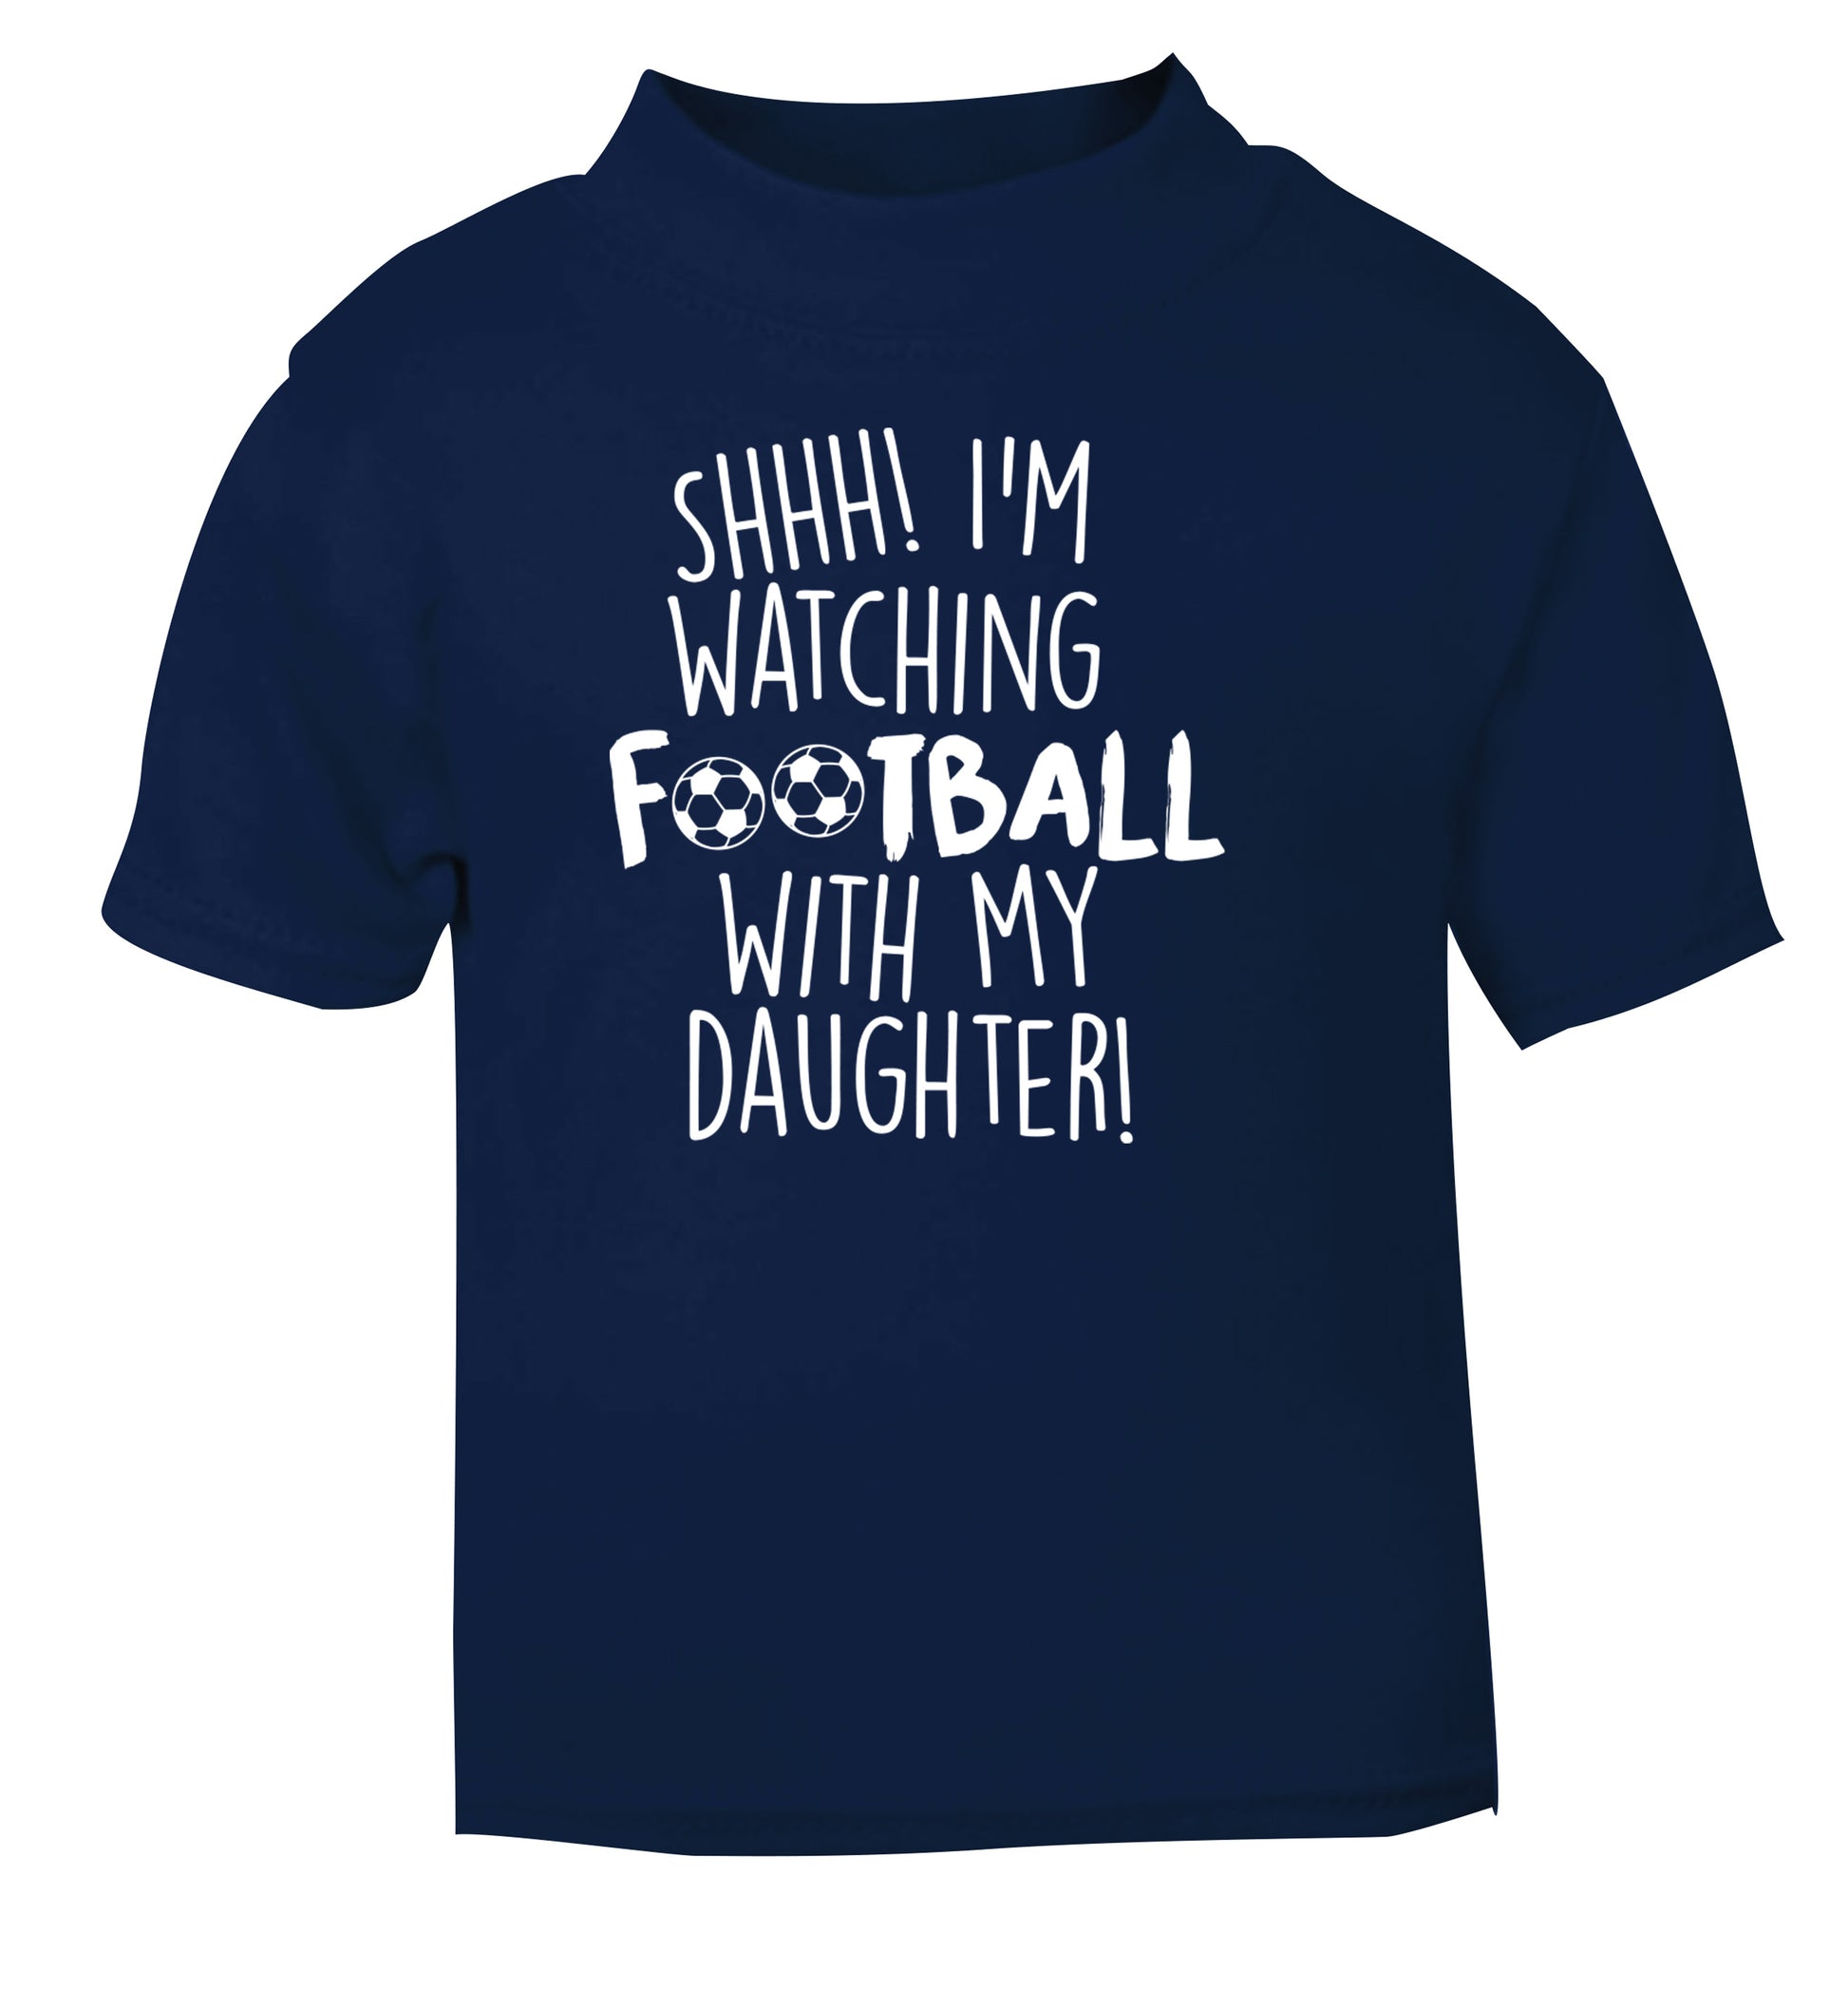 Shhh I'm watching football with my daughter navy Baby Toddler Tshirt 2 Years